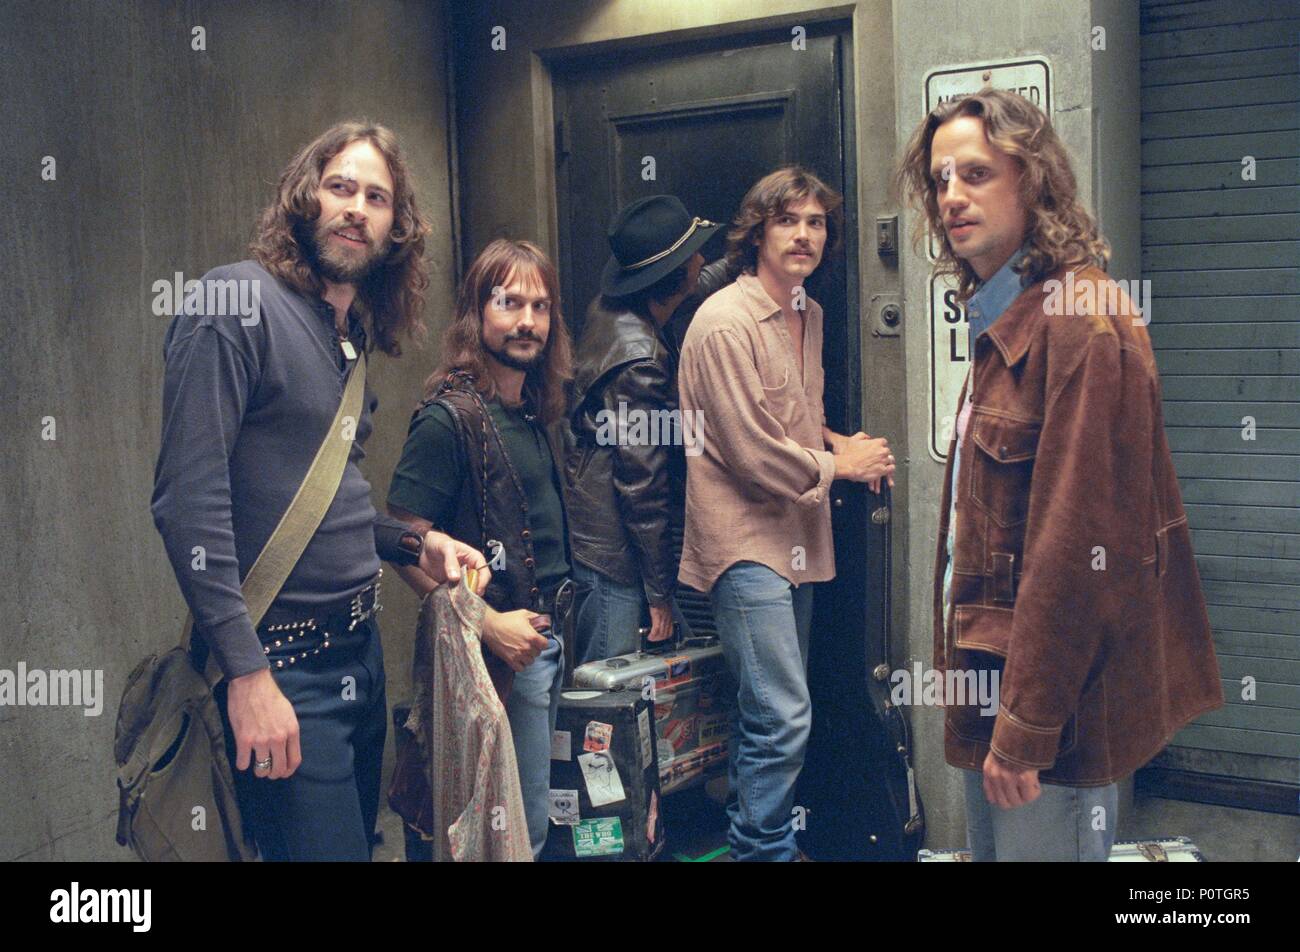 Original Film Title: ALMOST FAMOUS.  English Title: ALMOST FAMOUS.  Film Director: CAMERON CROWE.  Year: 2000.  Stars: BILLY CRUDUP; JASON LEE; NOAH TAYLOR; MARK KOZELEK; JOHN FEDEVICH. Credit: COLUMBIA PICTURES/DREAMWORKS PICTURES / PRESTON, NEAL / Album Stock Photo